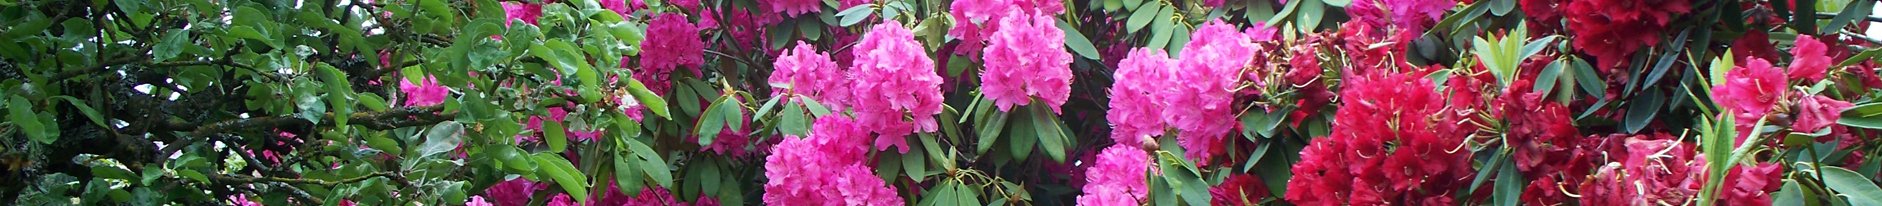 Rhododendron Flower Tour North East India